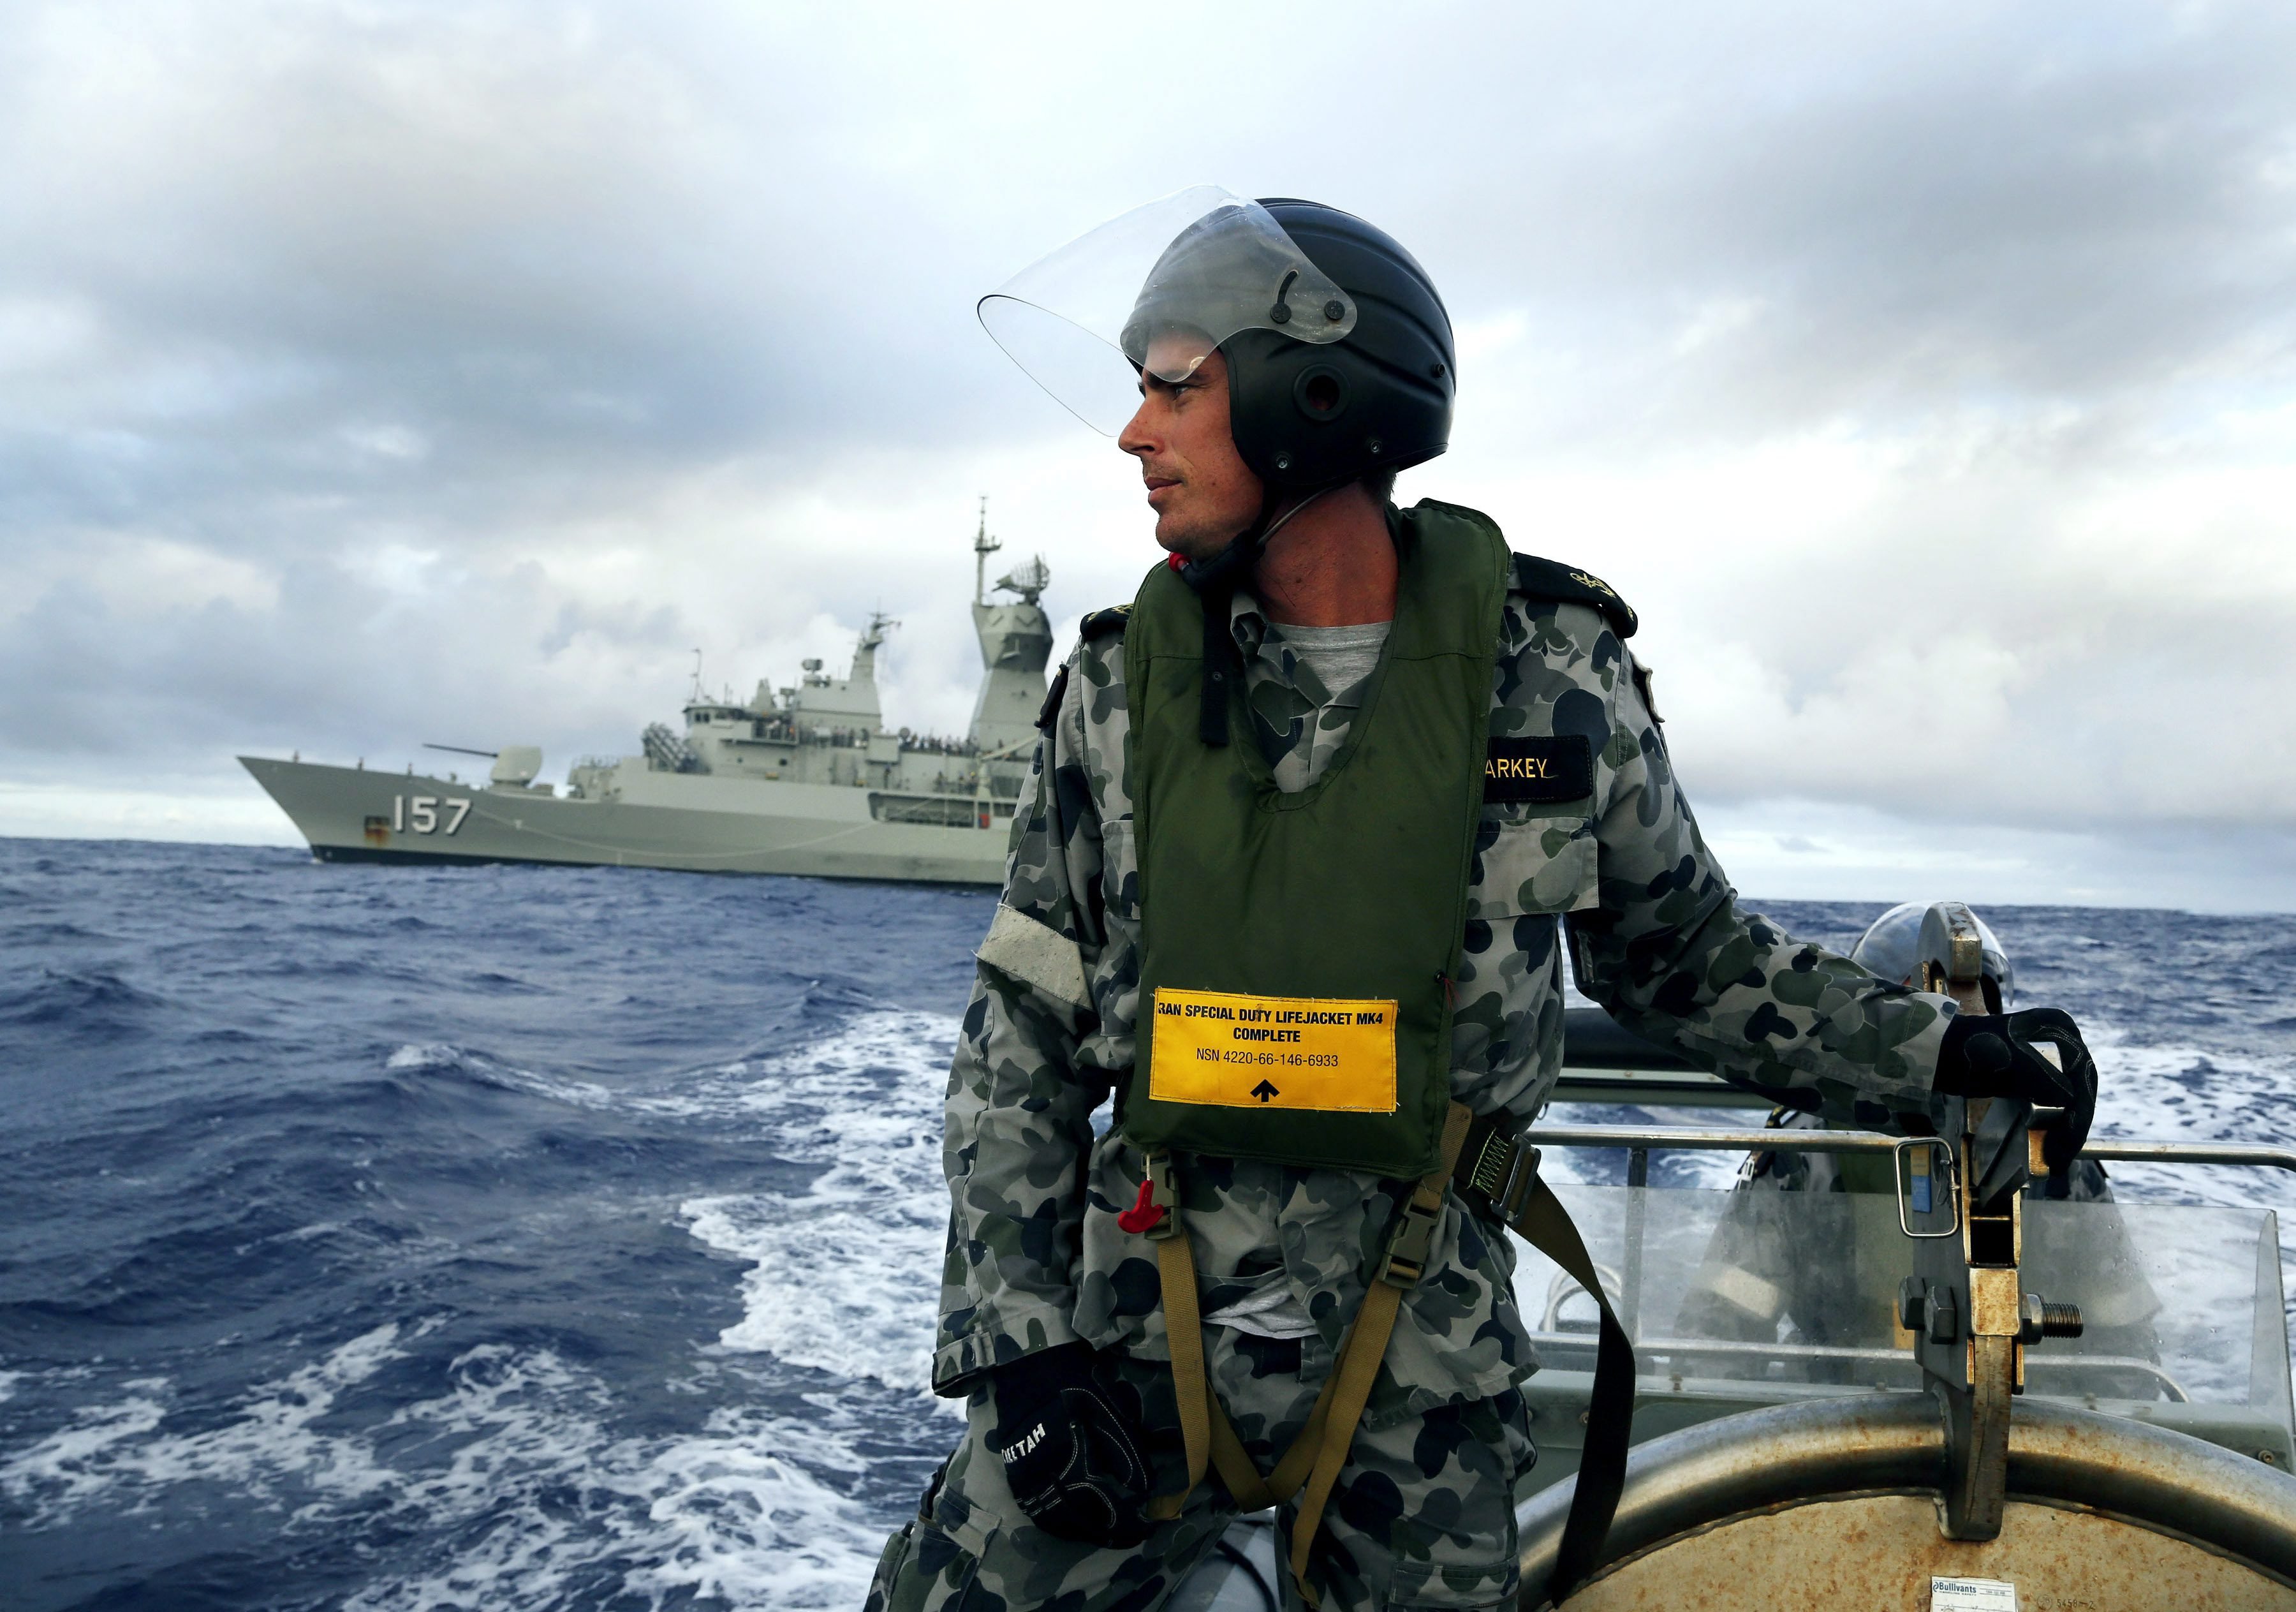 Leading Seaman, Boatswain's Mate, William Sharkey searching for debris in the Southern Indian Ocean on April 6, 2014. (Australian Defence Department—EPA)